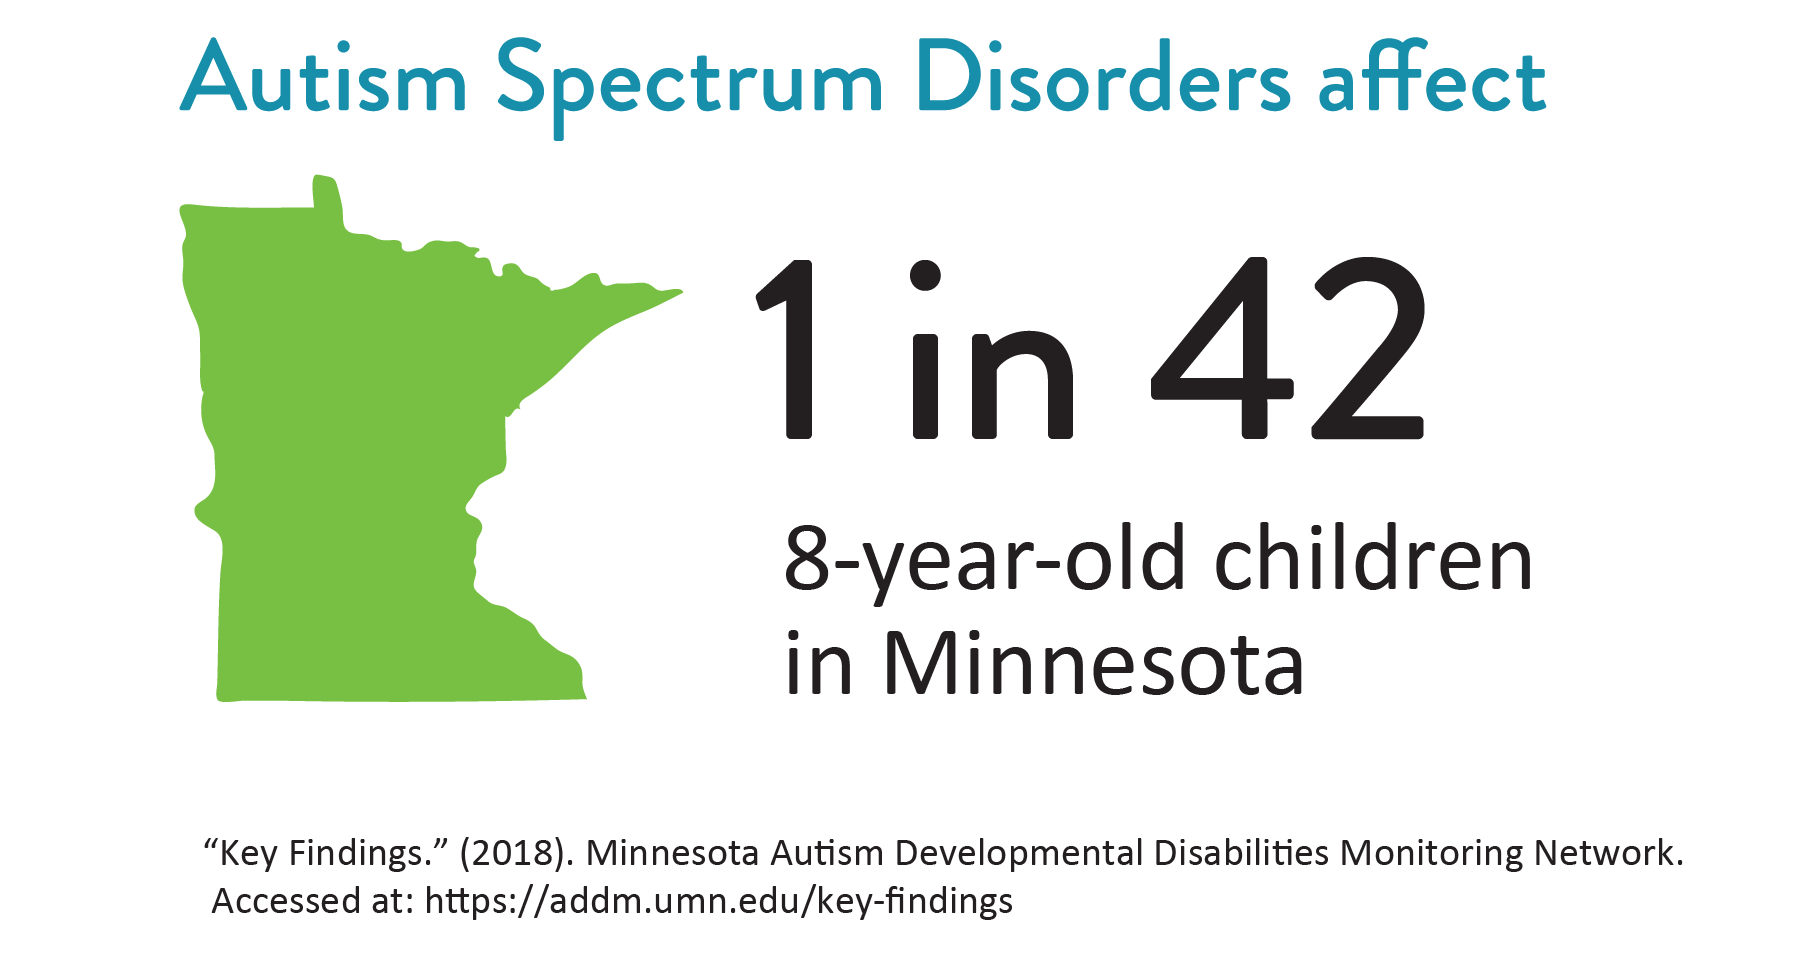 Autism Spectrum Disorders affect 1 in 42 8-year-old children in Minnesota. 